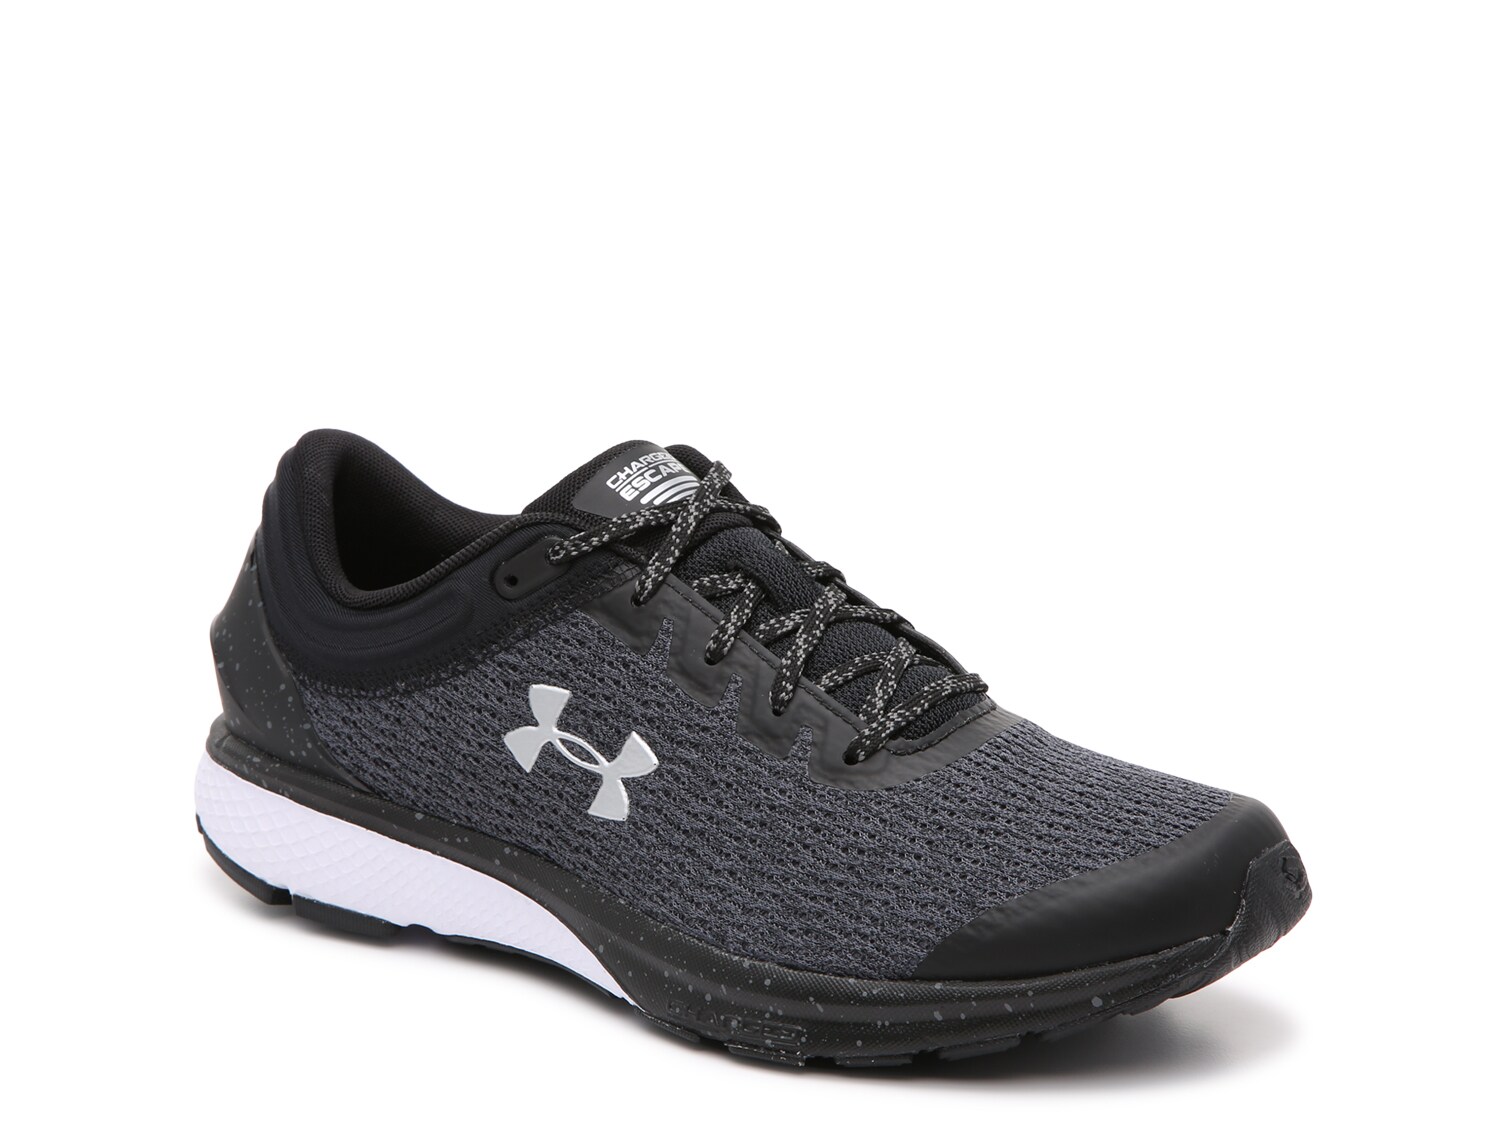 under armour mens shoes clearance